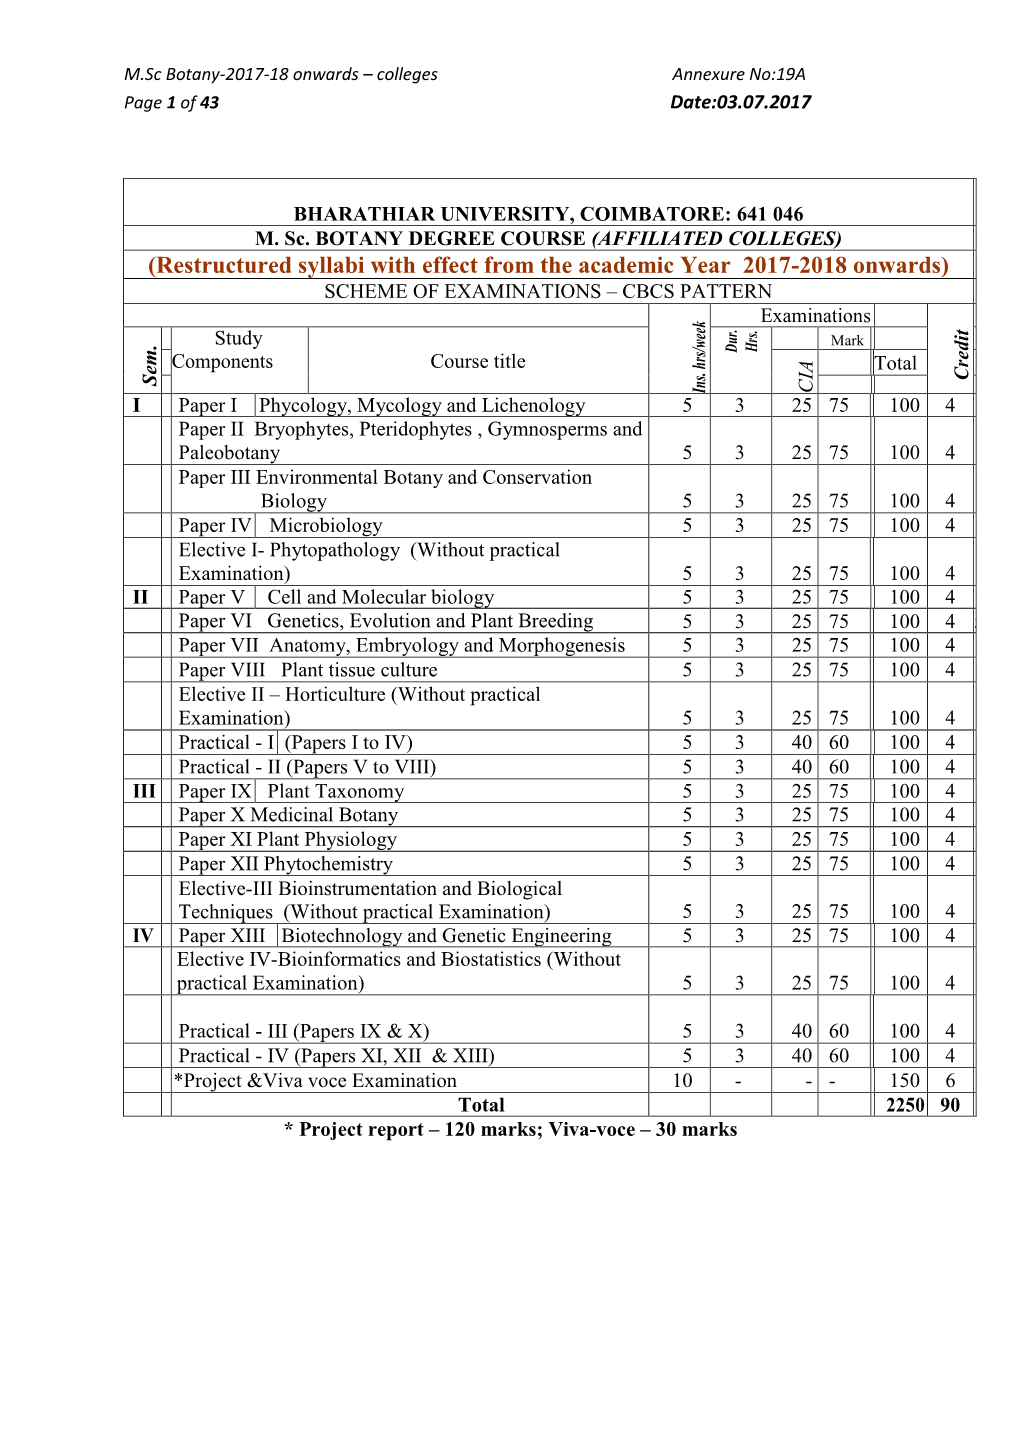 Restructured Syllabi with Effect from the Academic Year 2017-2018 Onwards